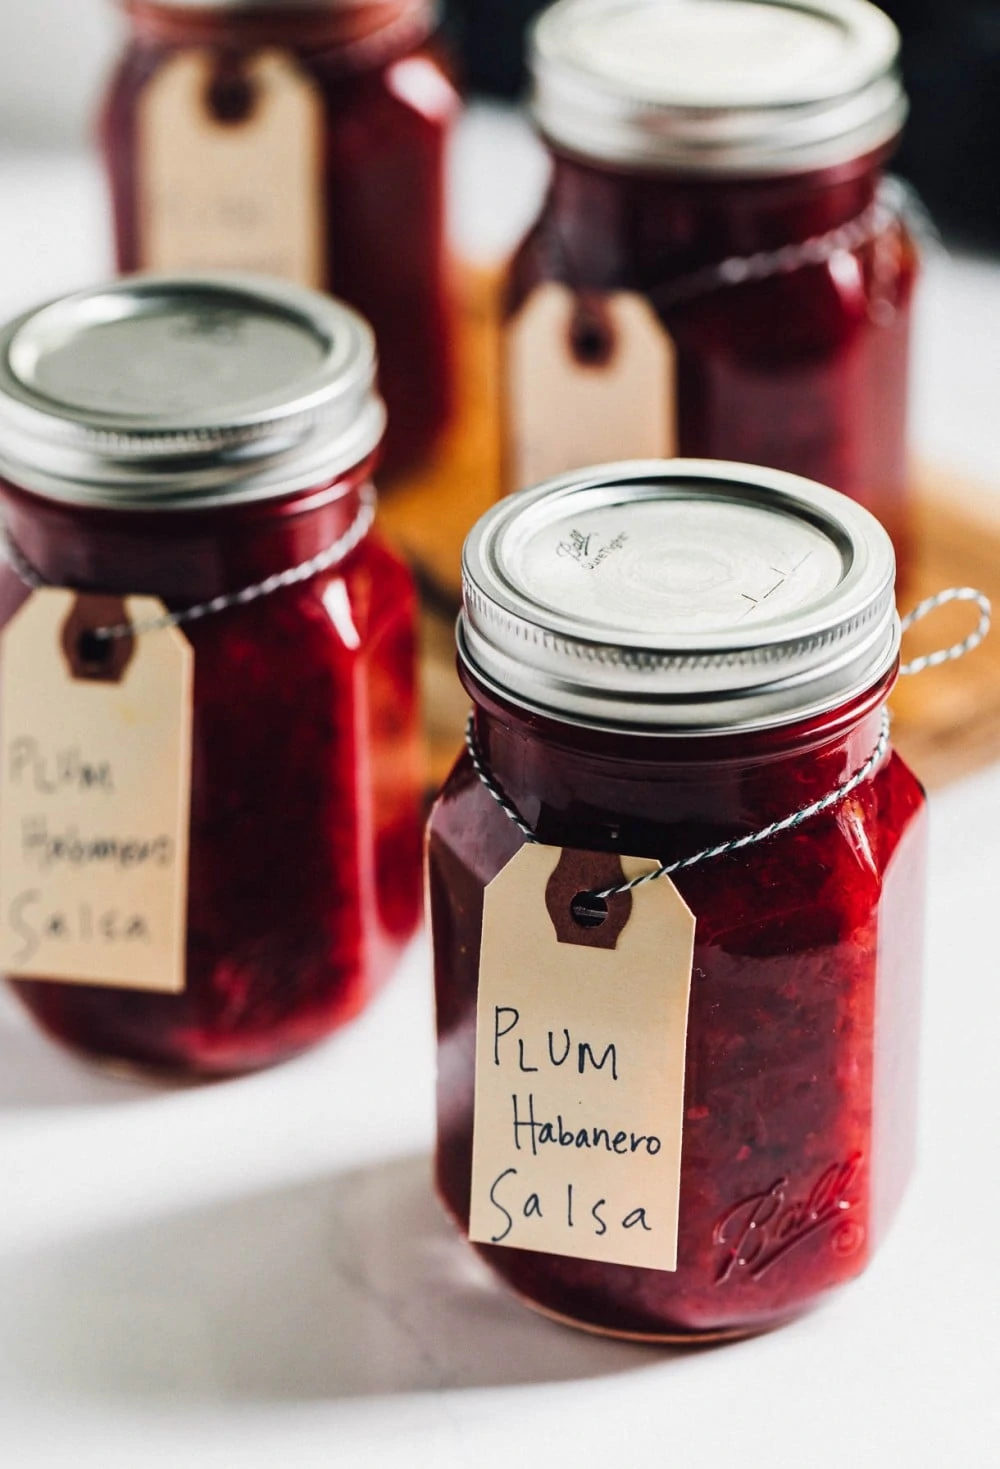 plum habanero salsa in glass ball jars, lined up